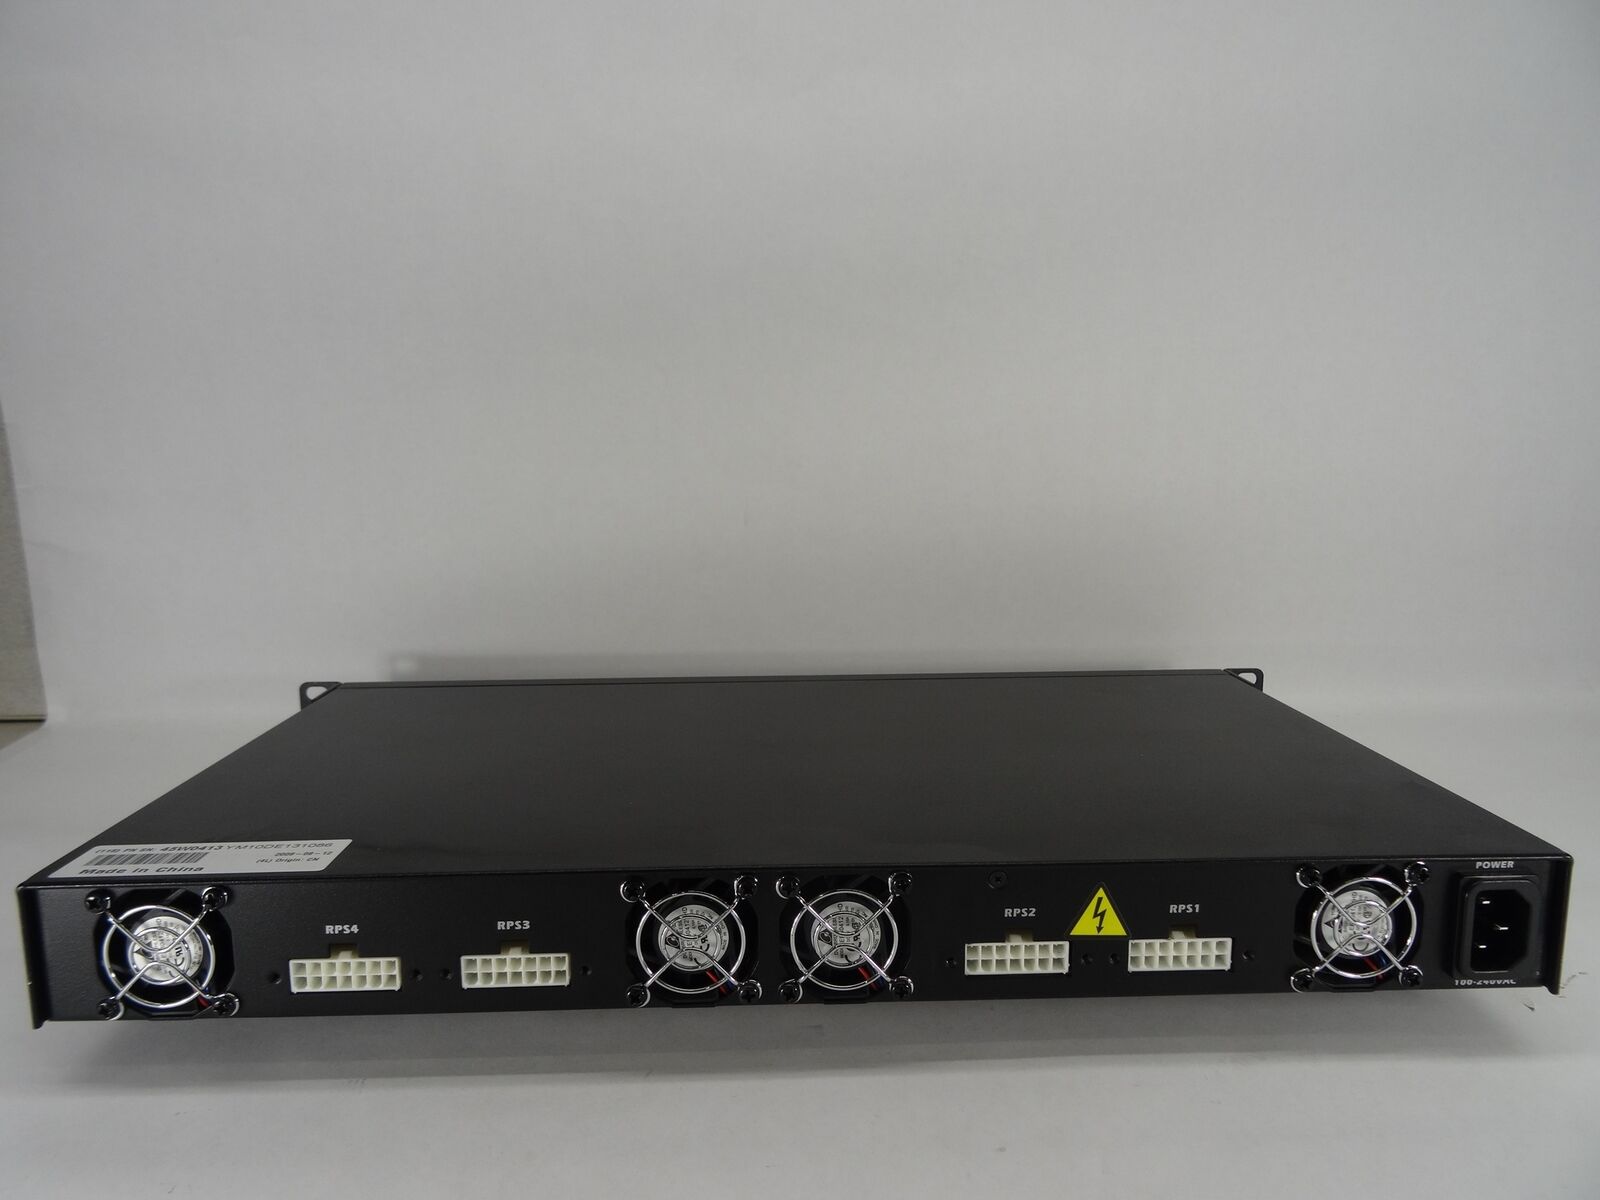 IBM 45W0413 DELL - IBM POWERCONNECT RPS-600 XIVG2 RACKMOUNT POWER SUPPLY